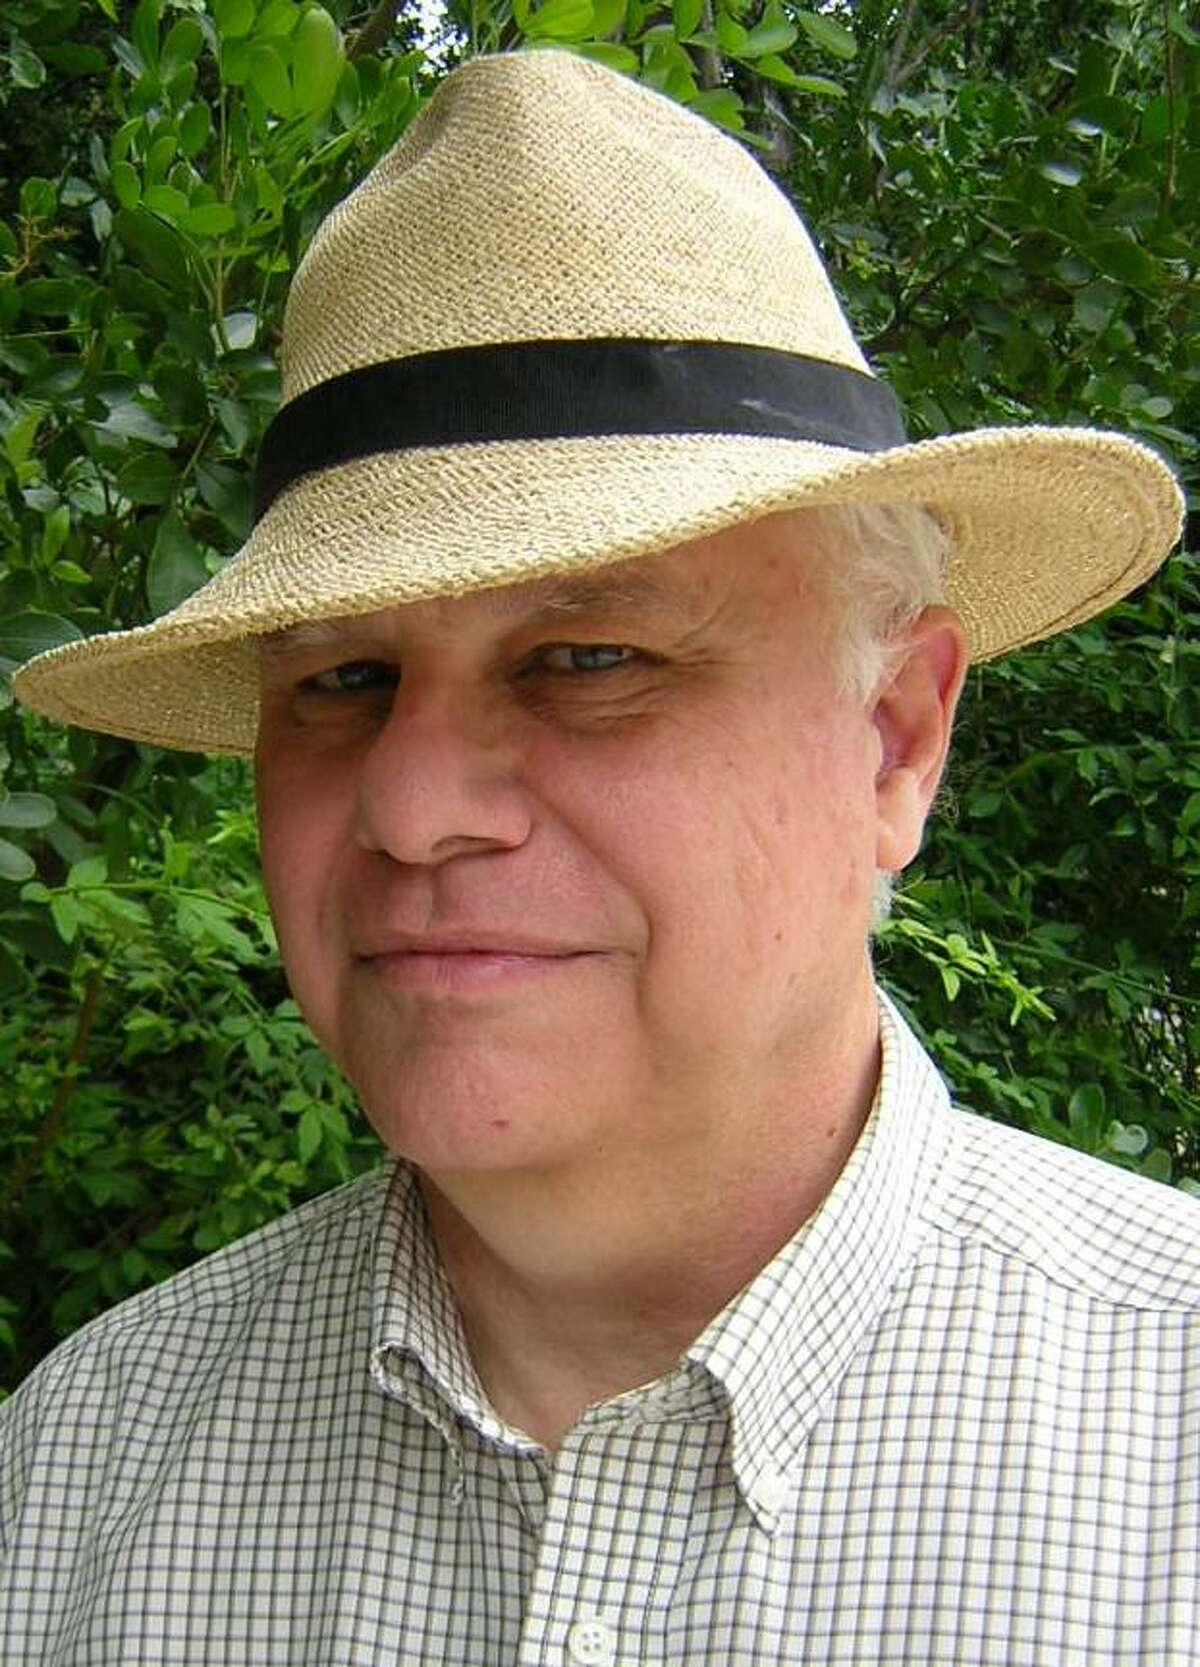 In “A New World,” Whitley Strieber explains the lessons he has learned in his attempts to communicate with nonhuman visitors.